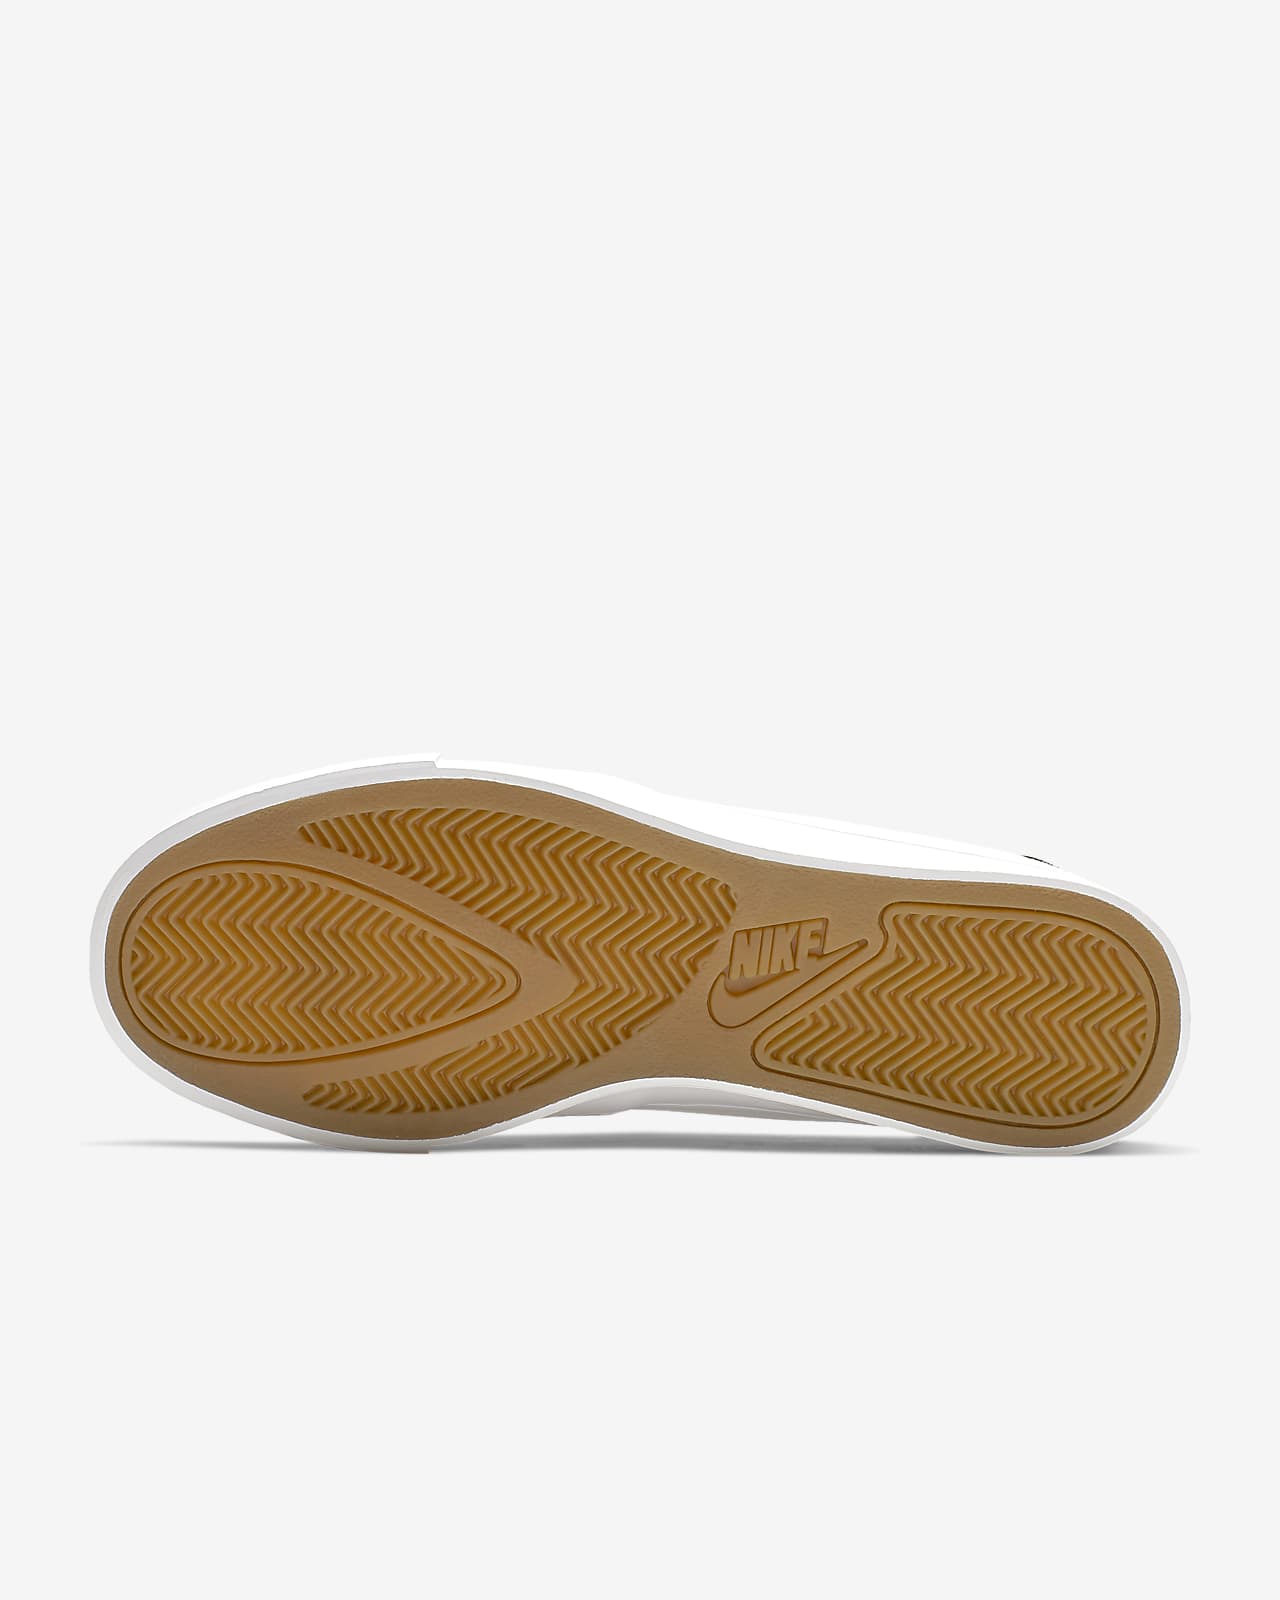 yellow slip on shoes womens